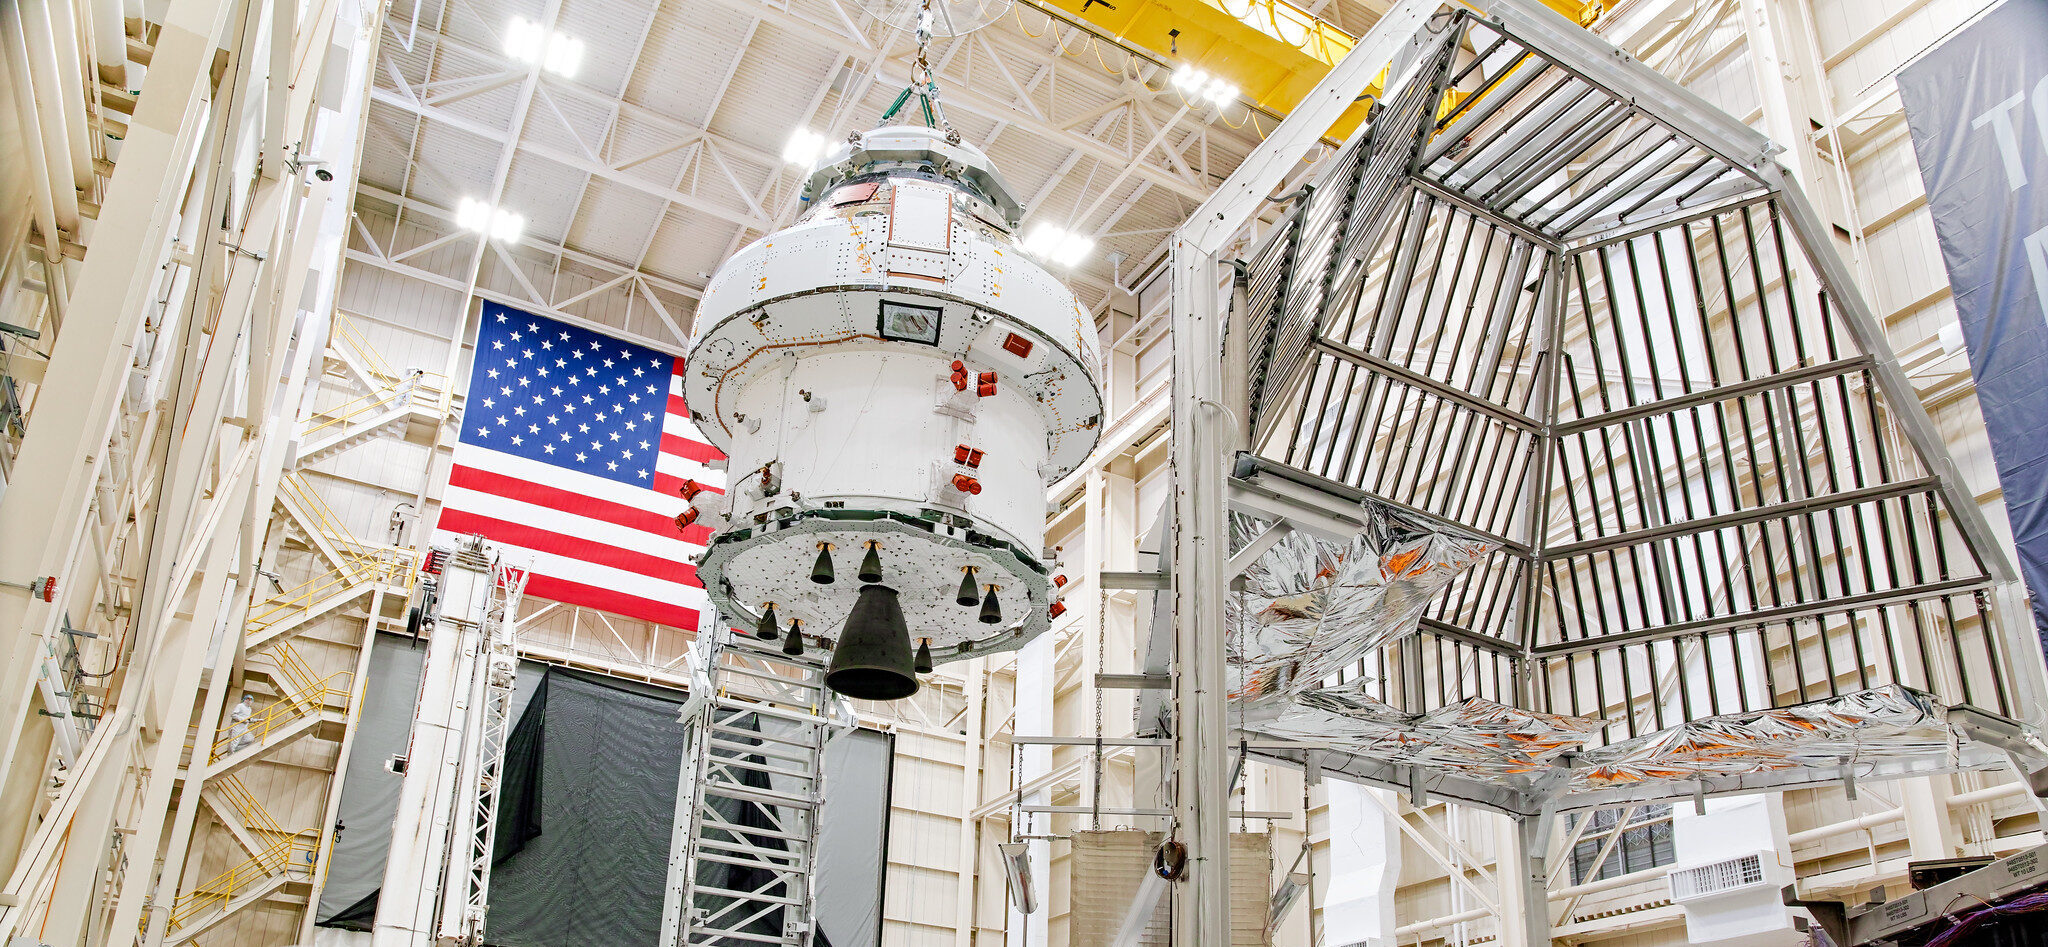 Lighting Spacecraft Launchpads and Hangars—an interview with a Space Coast Lighting Professional